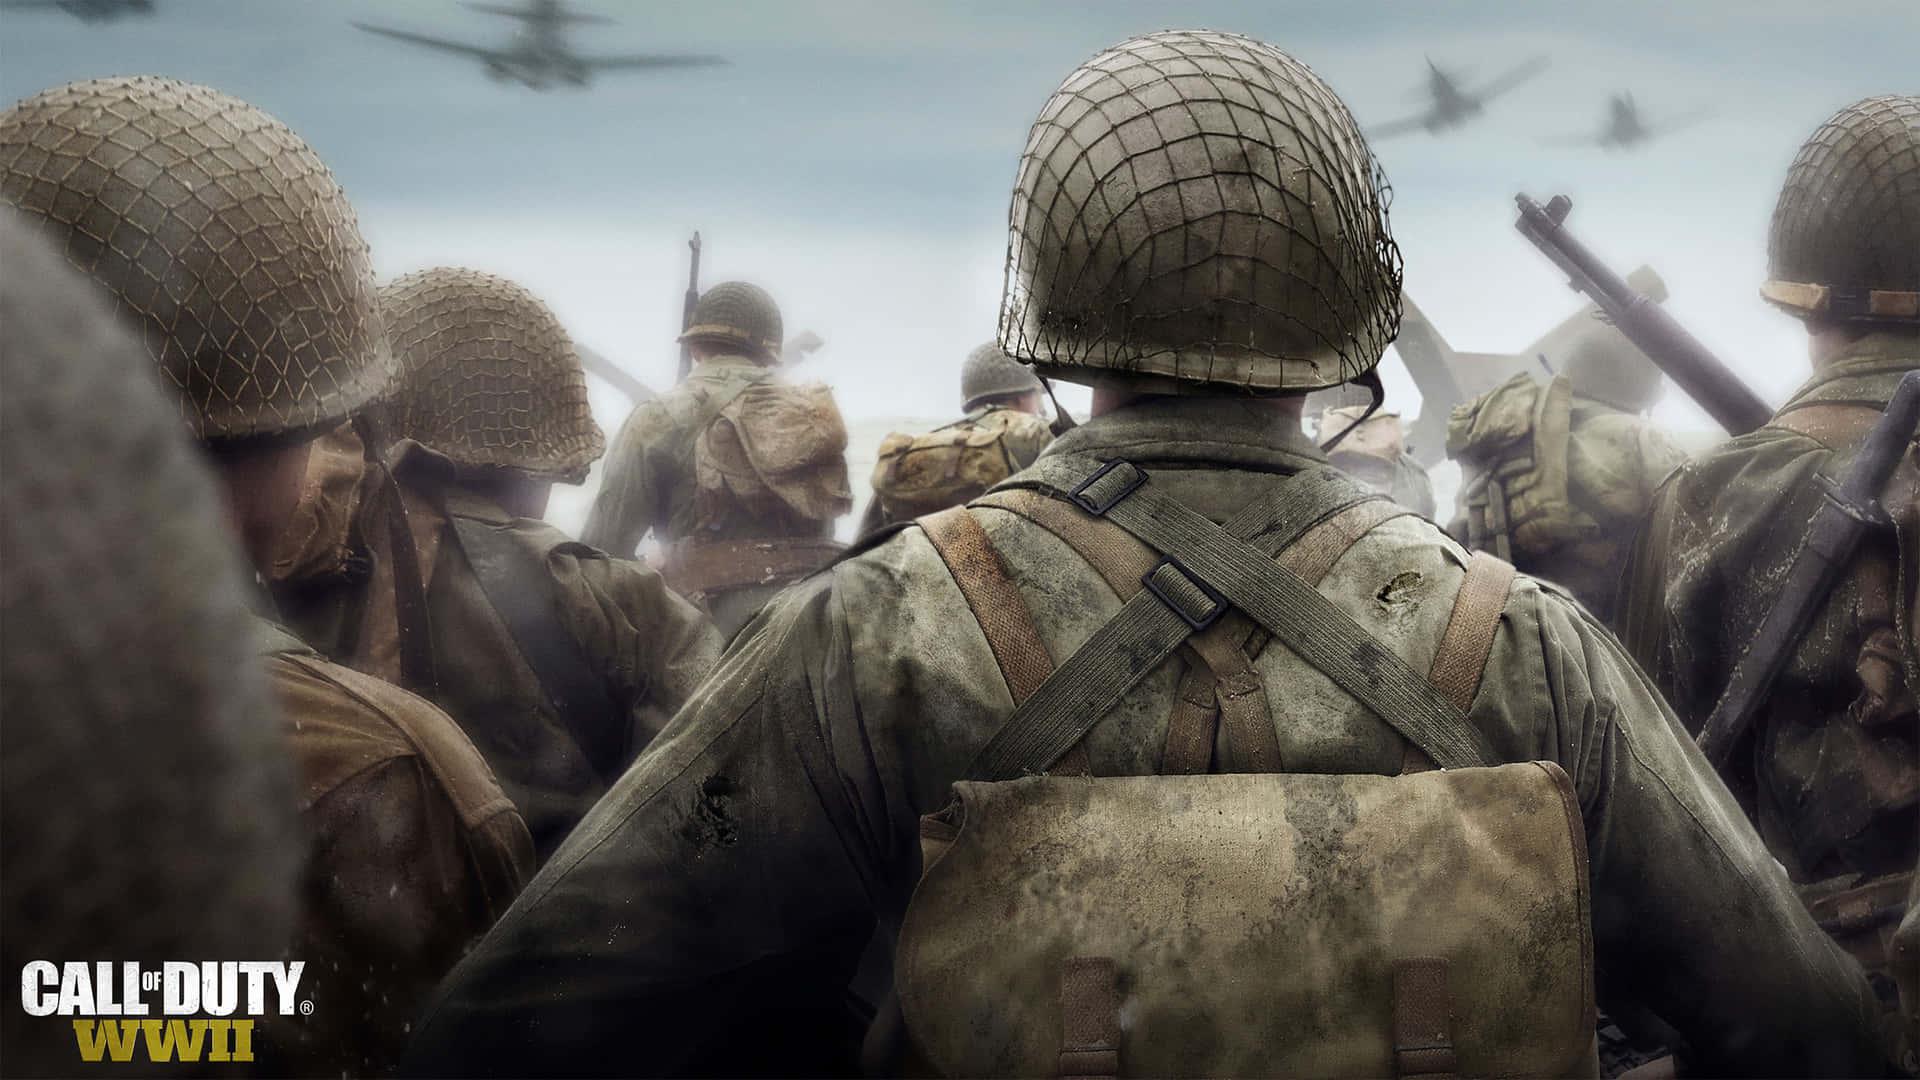 Ready For A Thrilling Call Of Duty Adventure? Wallpaper